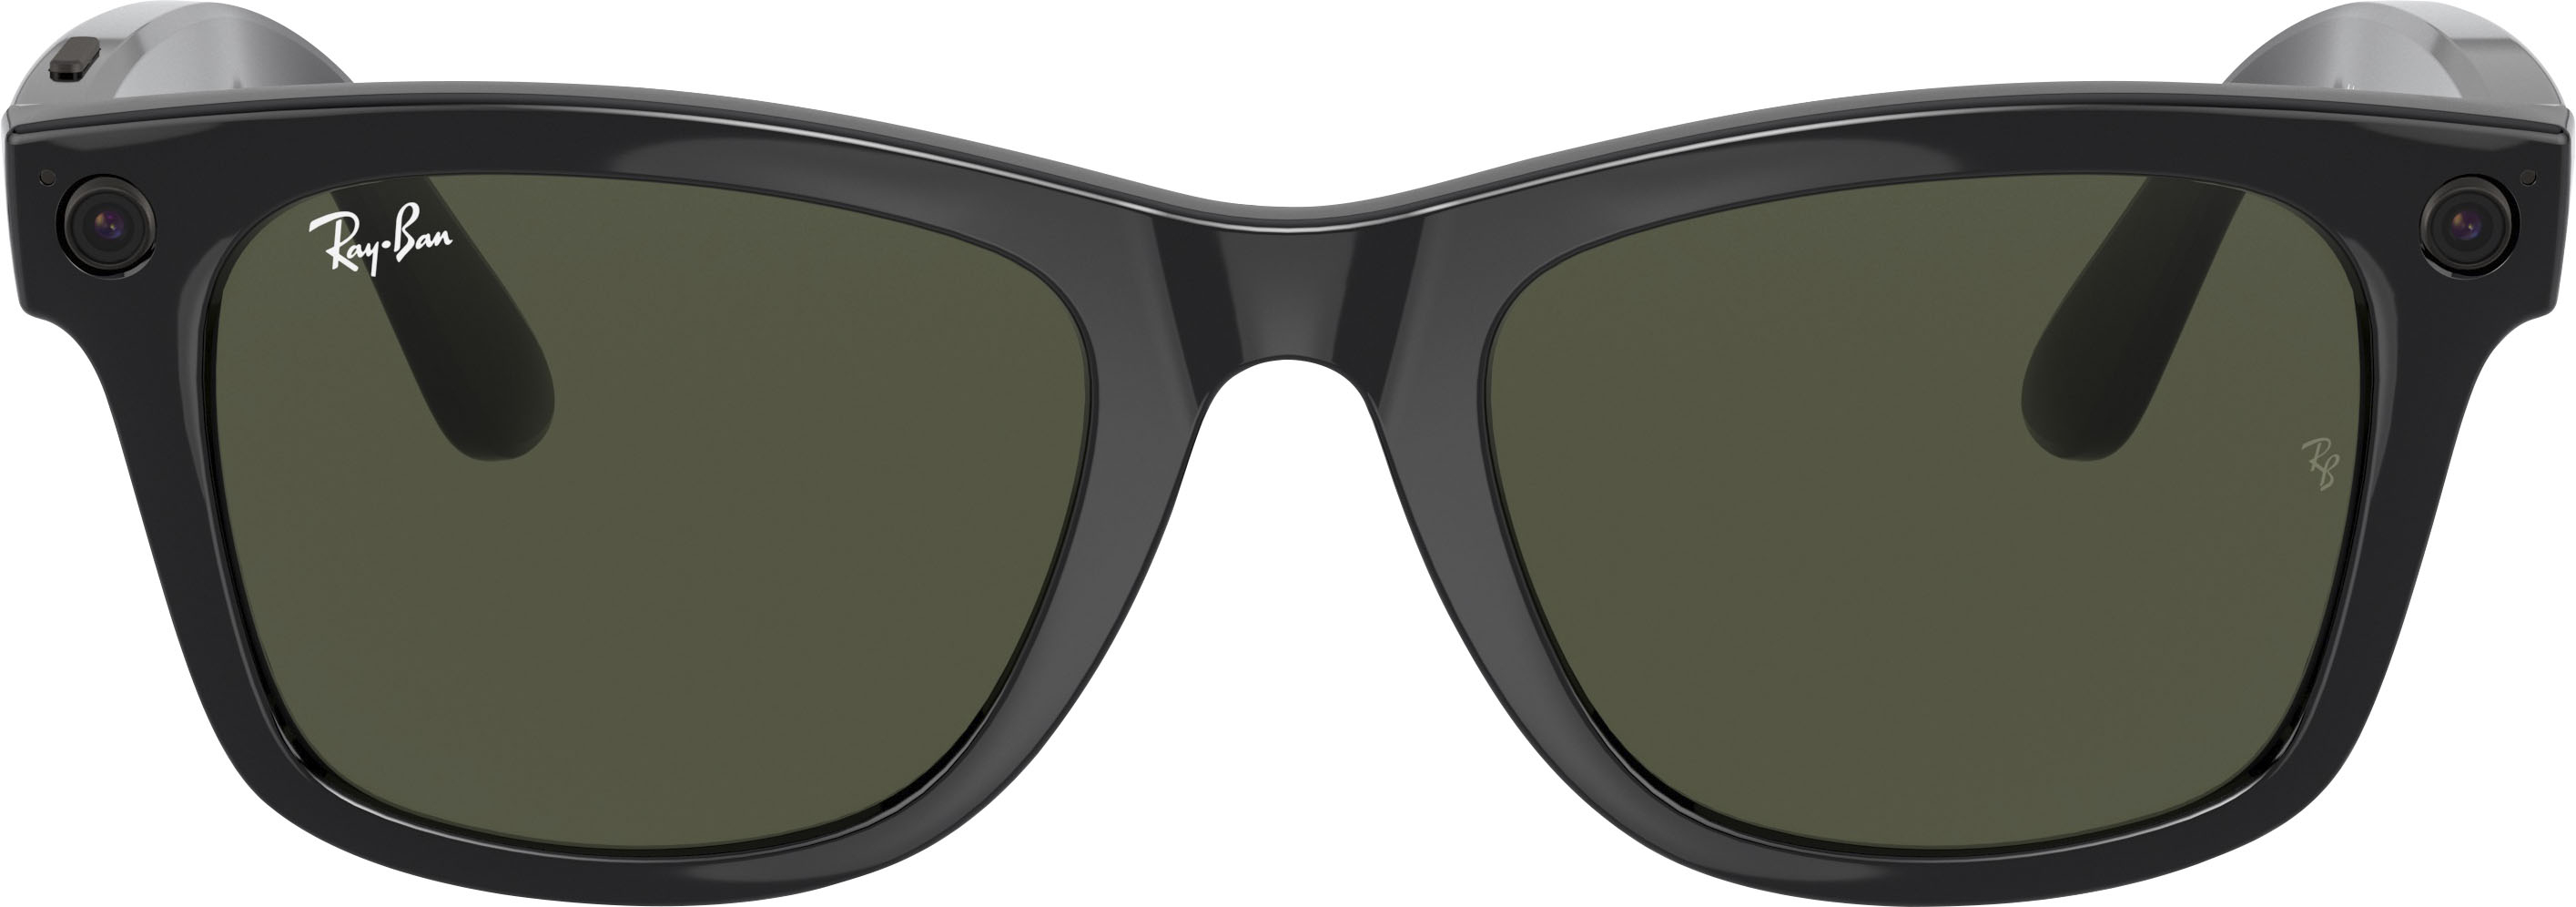 Zoom In On Angle Zoom. Ray-Ban - Stories Wayfarer Smart Glasses 53Mm - Shiny Black/Green.